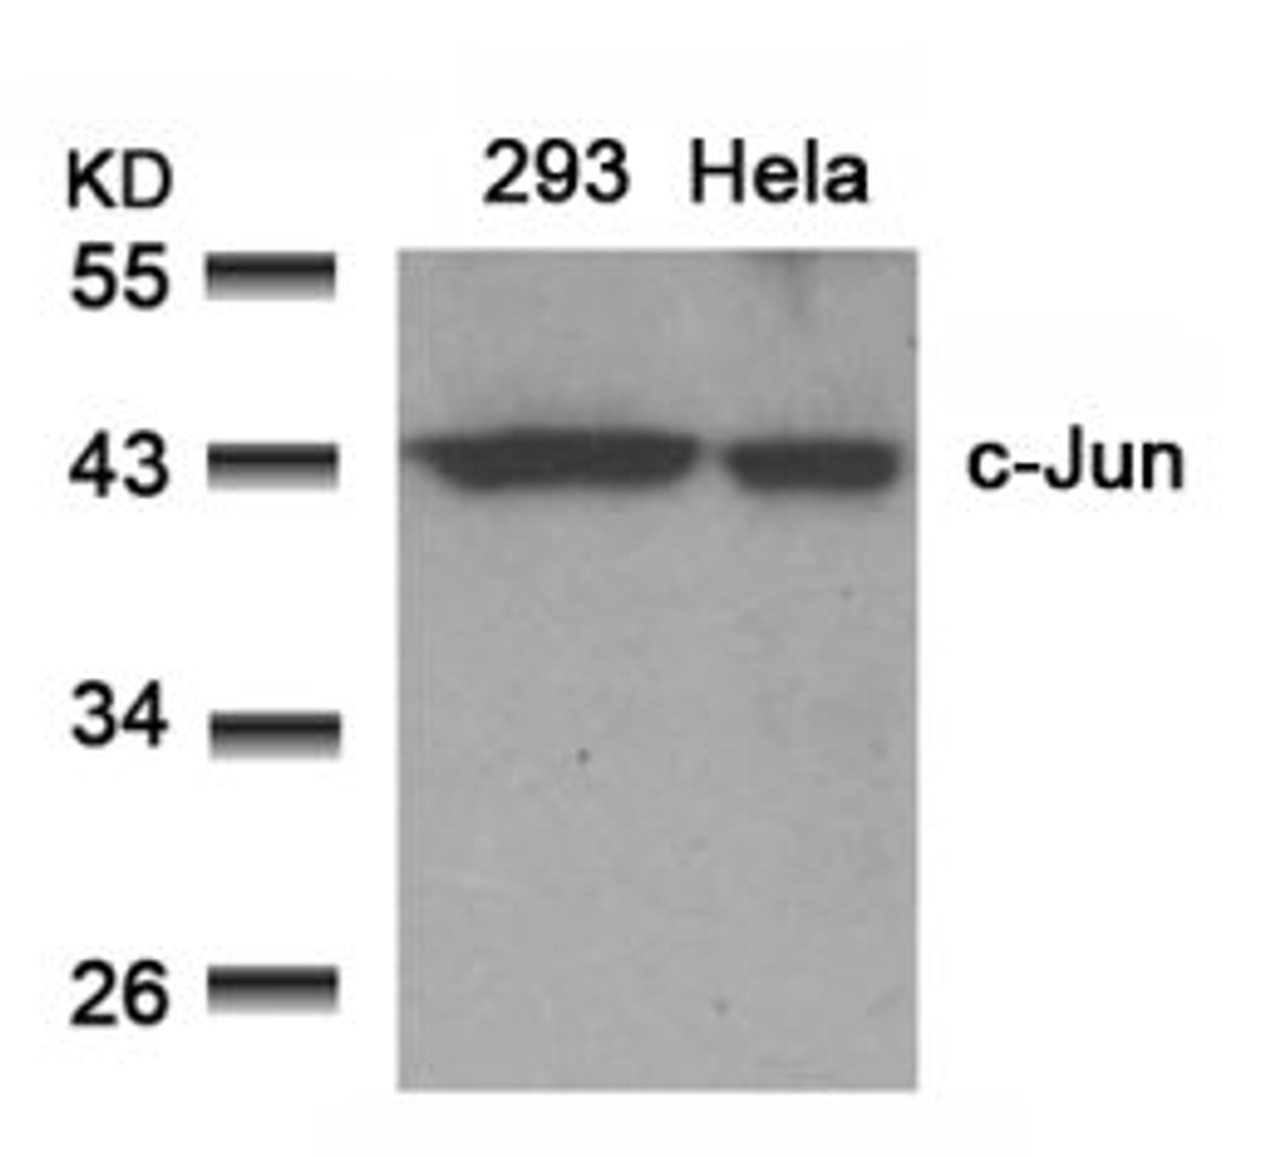 Western blot analysis of lysed extracts from 293 and HeLa cells using c-Jun (Ab-91) .